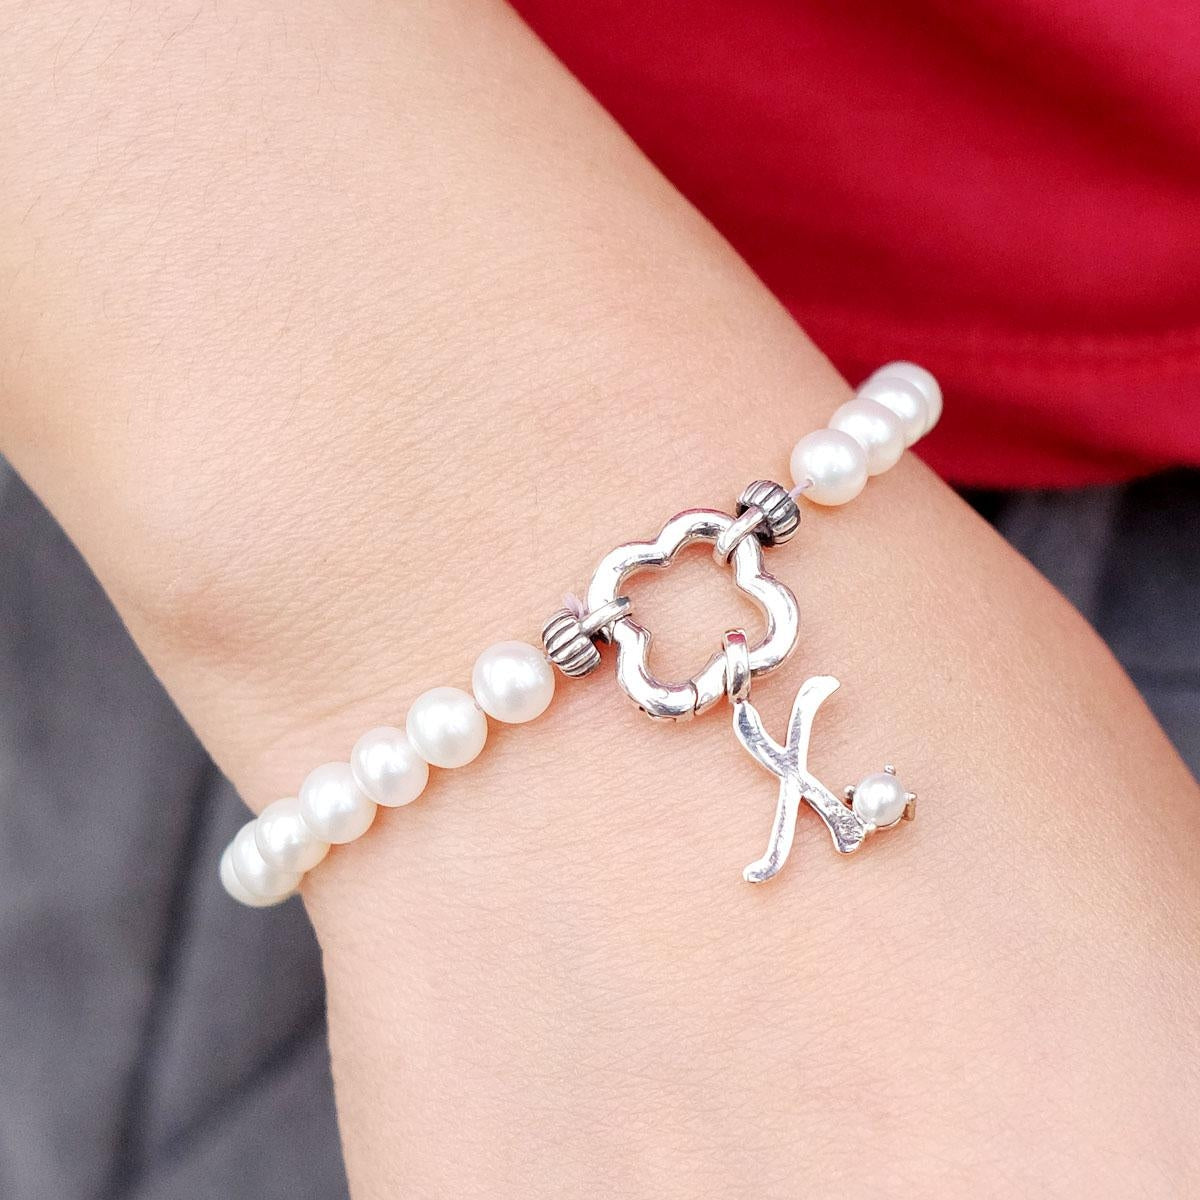 Buy Morse Code Bracelet Funny Gift for Women Girl with Meaning Card Gift  Card for Best Friend Couple Mom Family (Beautiful Girl) at Amazon.in